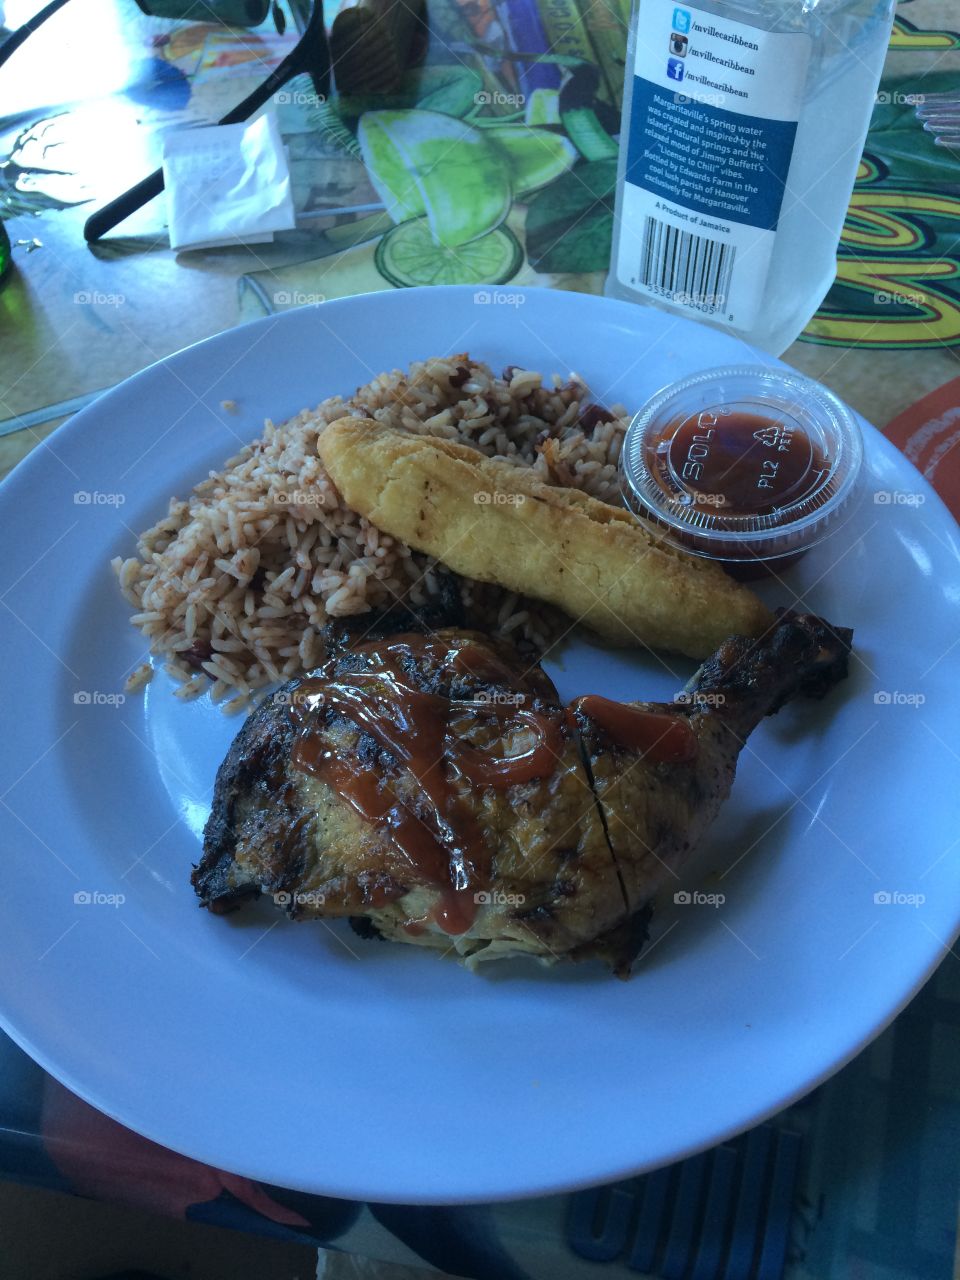 Authentic jerk chicken with rice and beans and festivals. Jamaican sunset in the back causing the blue over cast as it starts to get dark on the beach. 